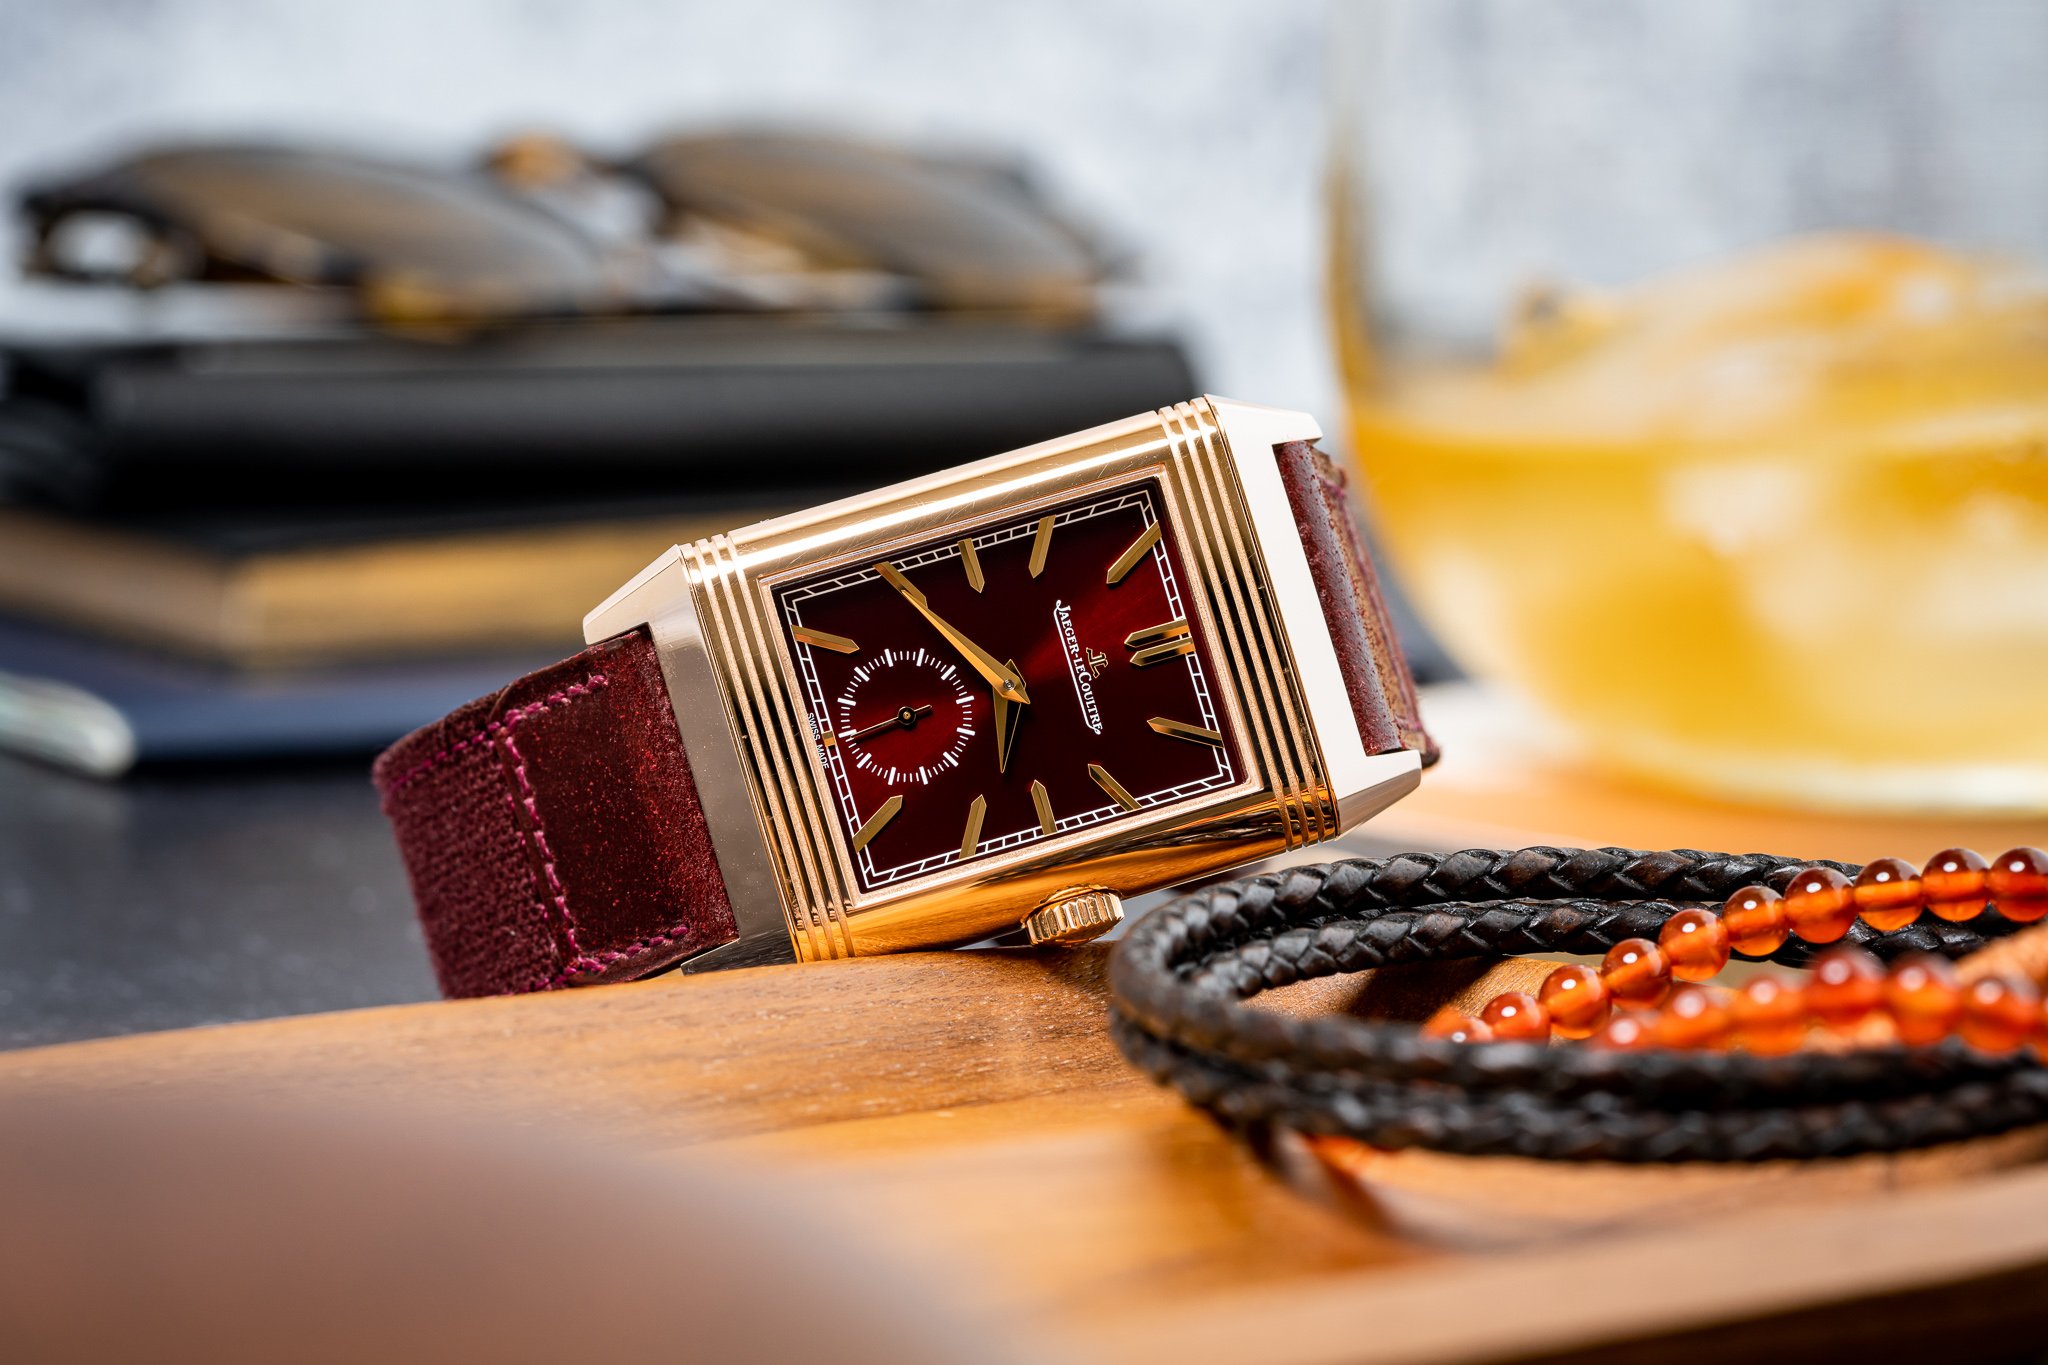 Jaeger-LeCoultre Reverso Tribute Duoface Fagliano Hands-On